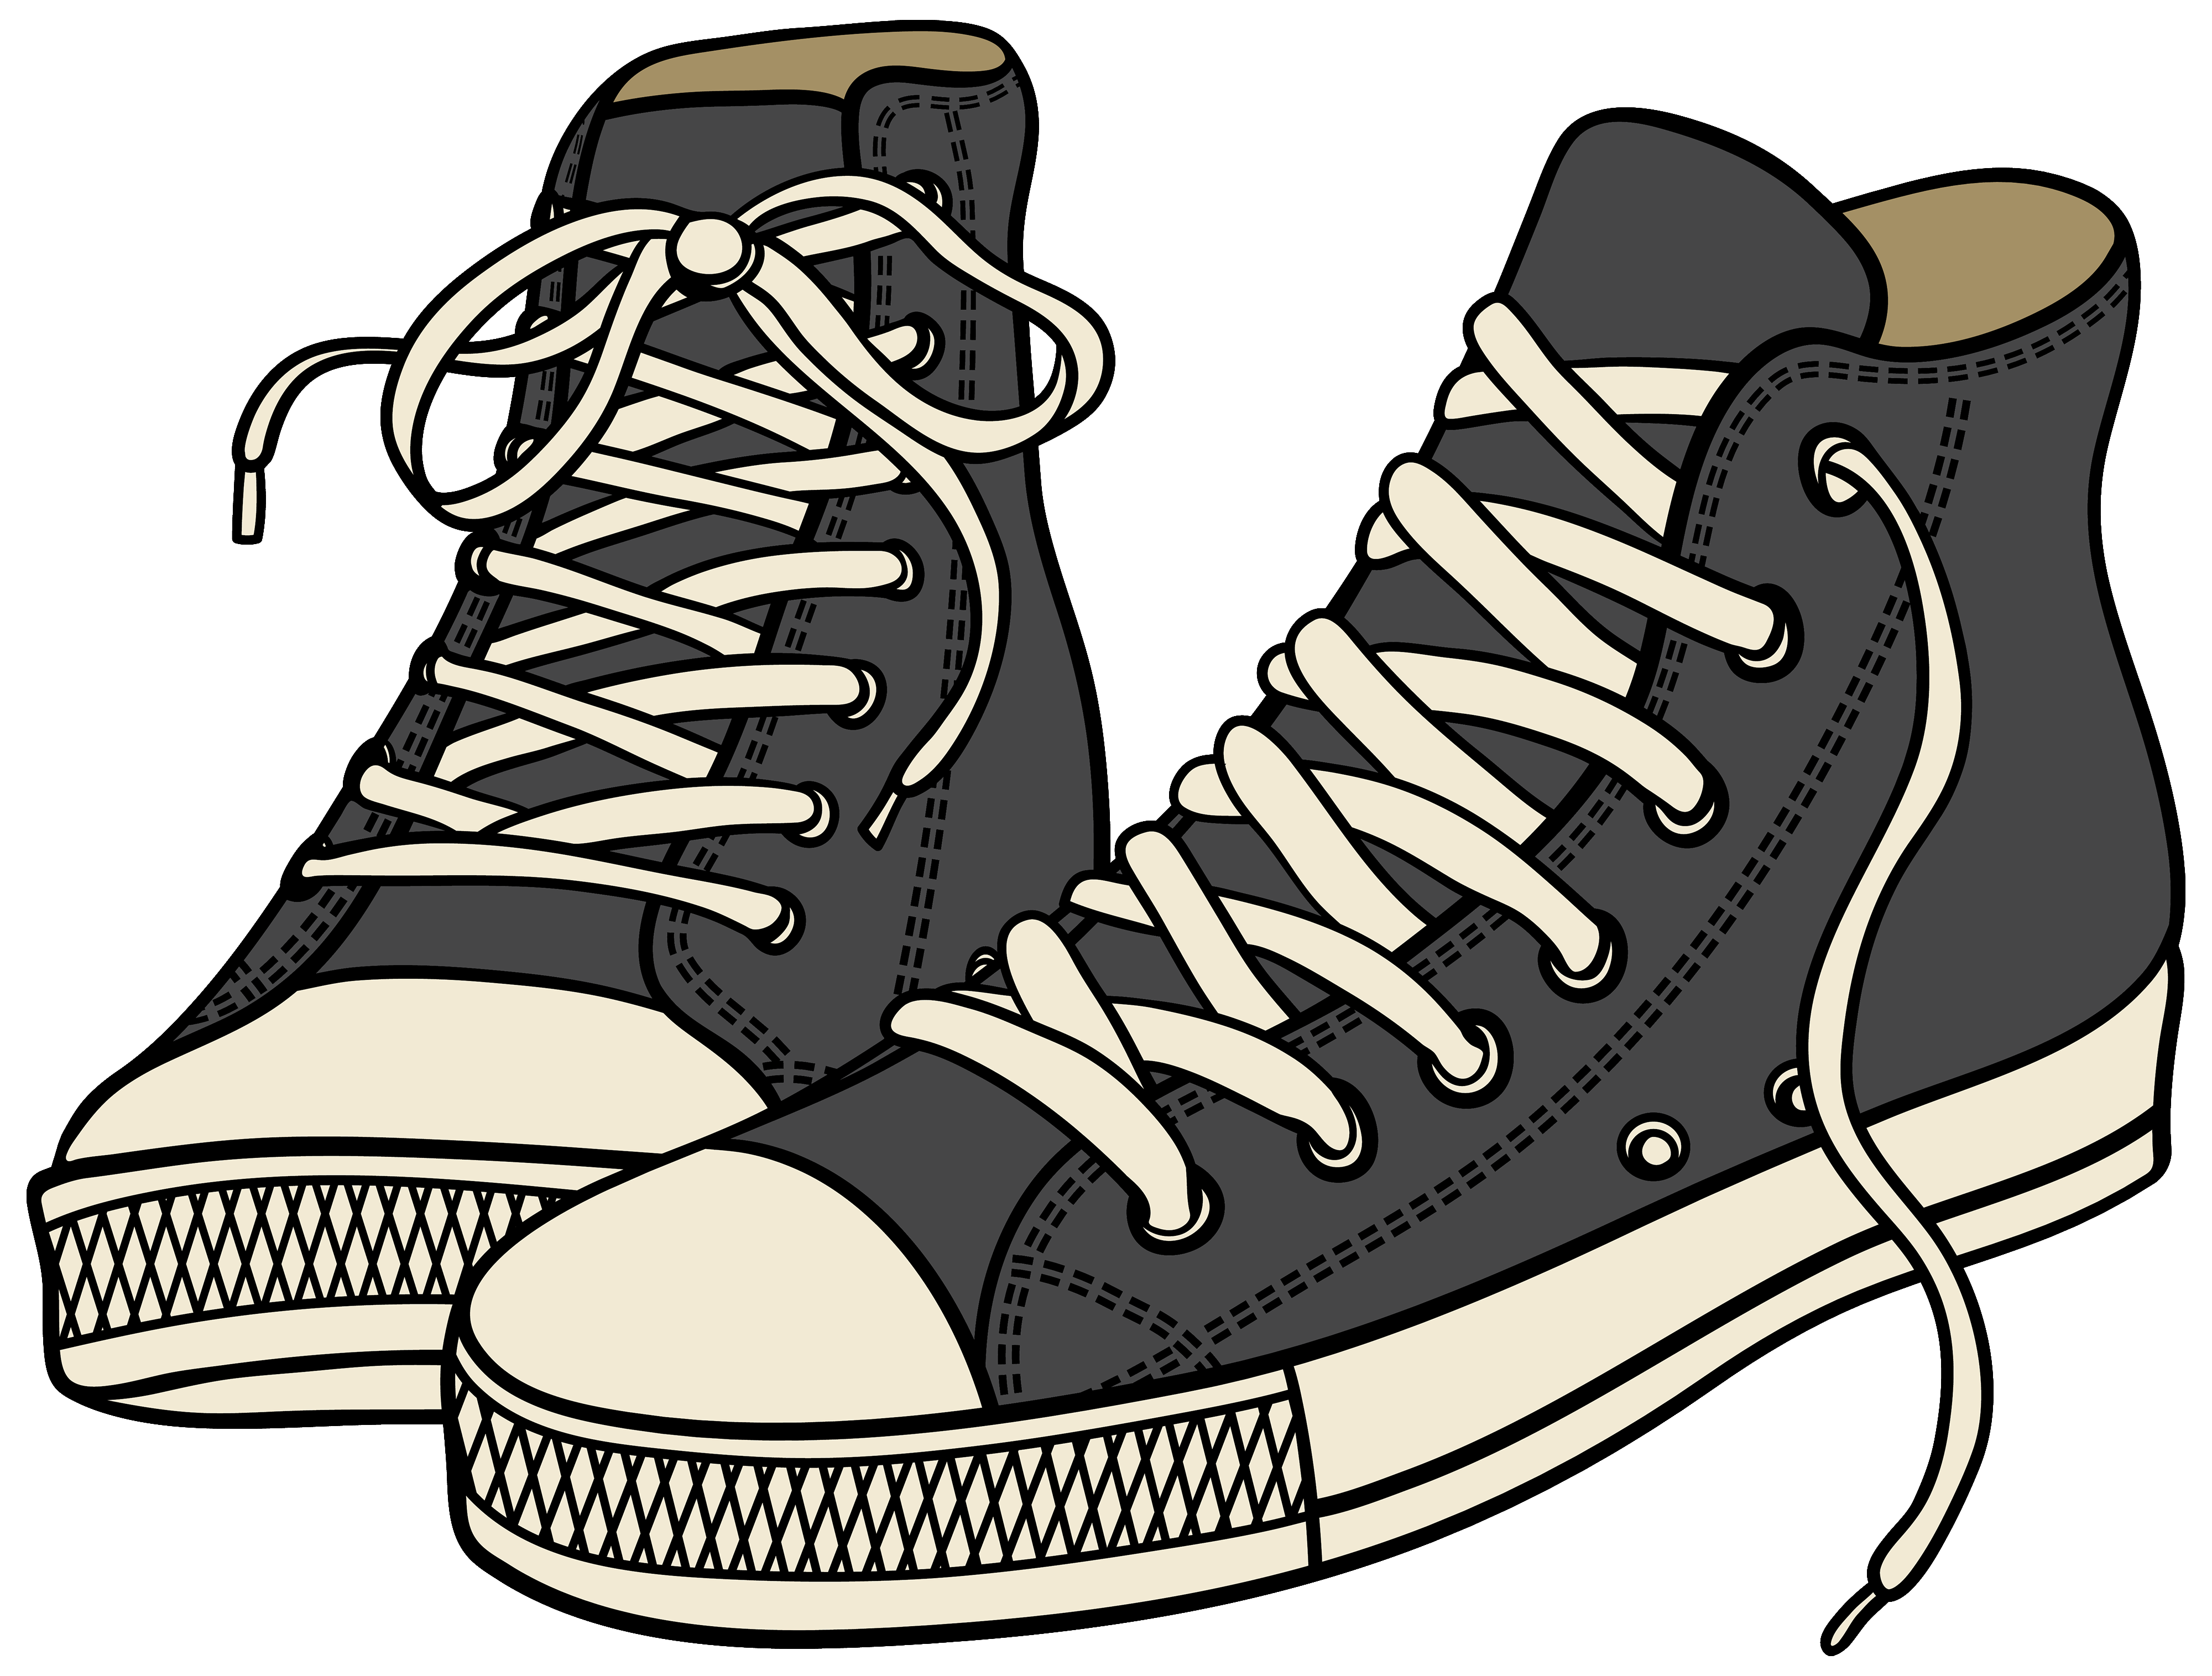 new shoes clipart - photo #11